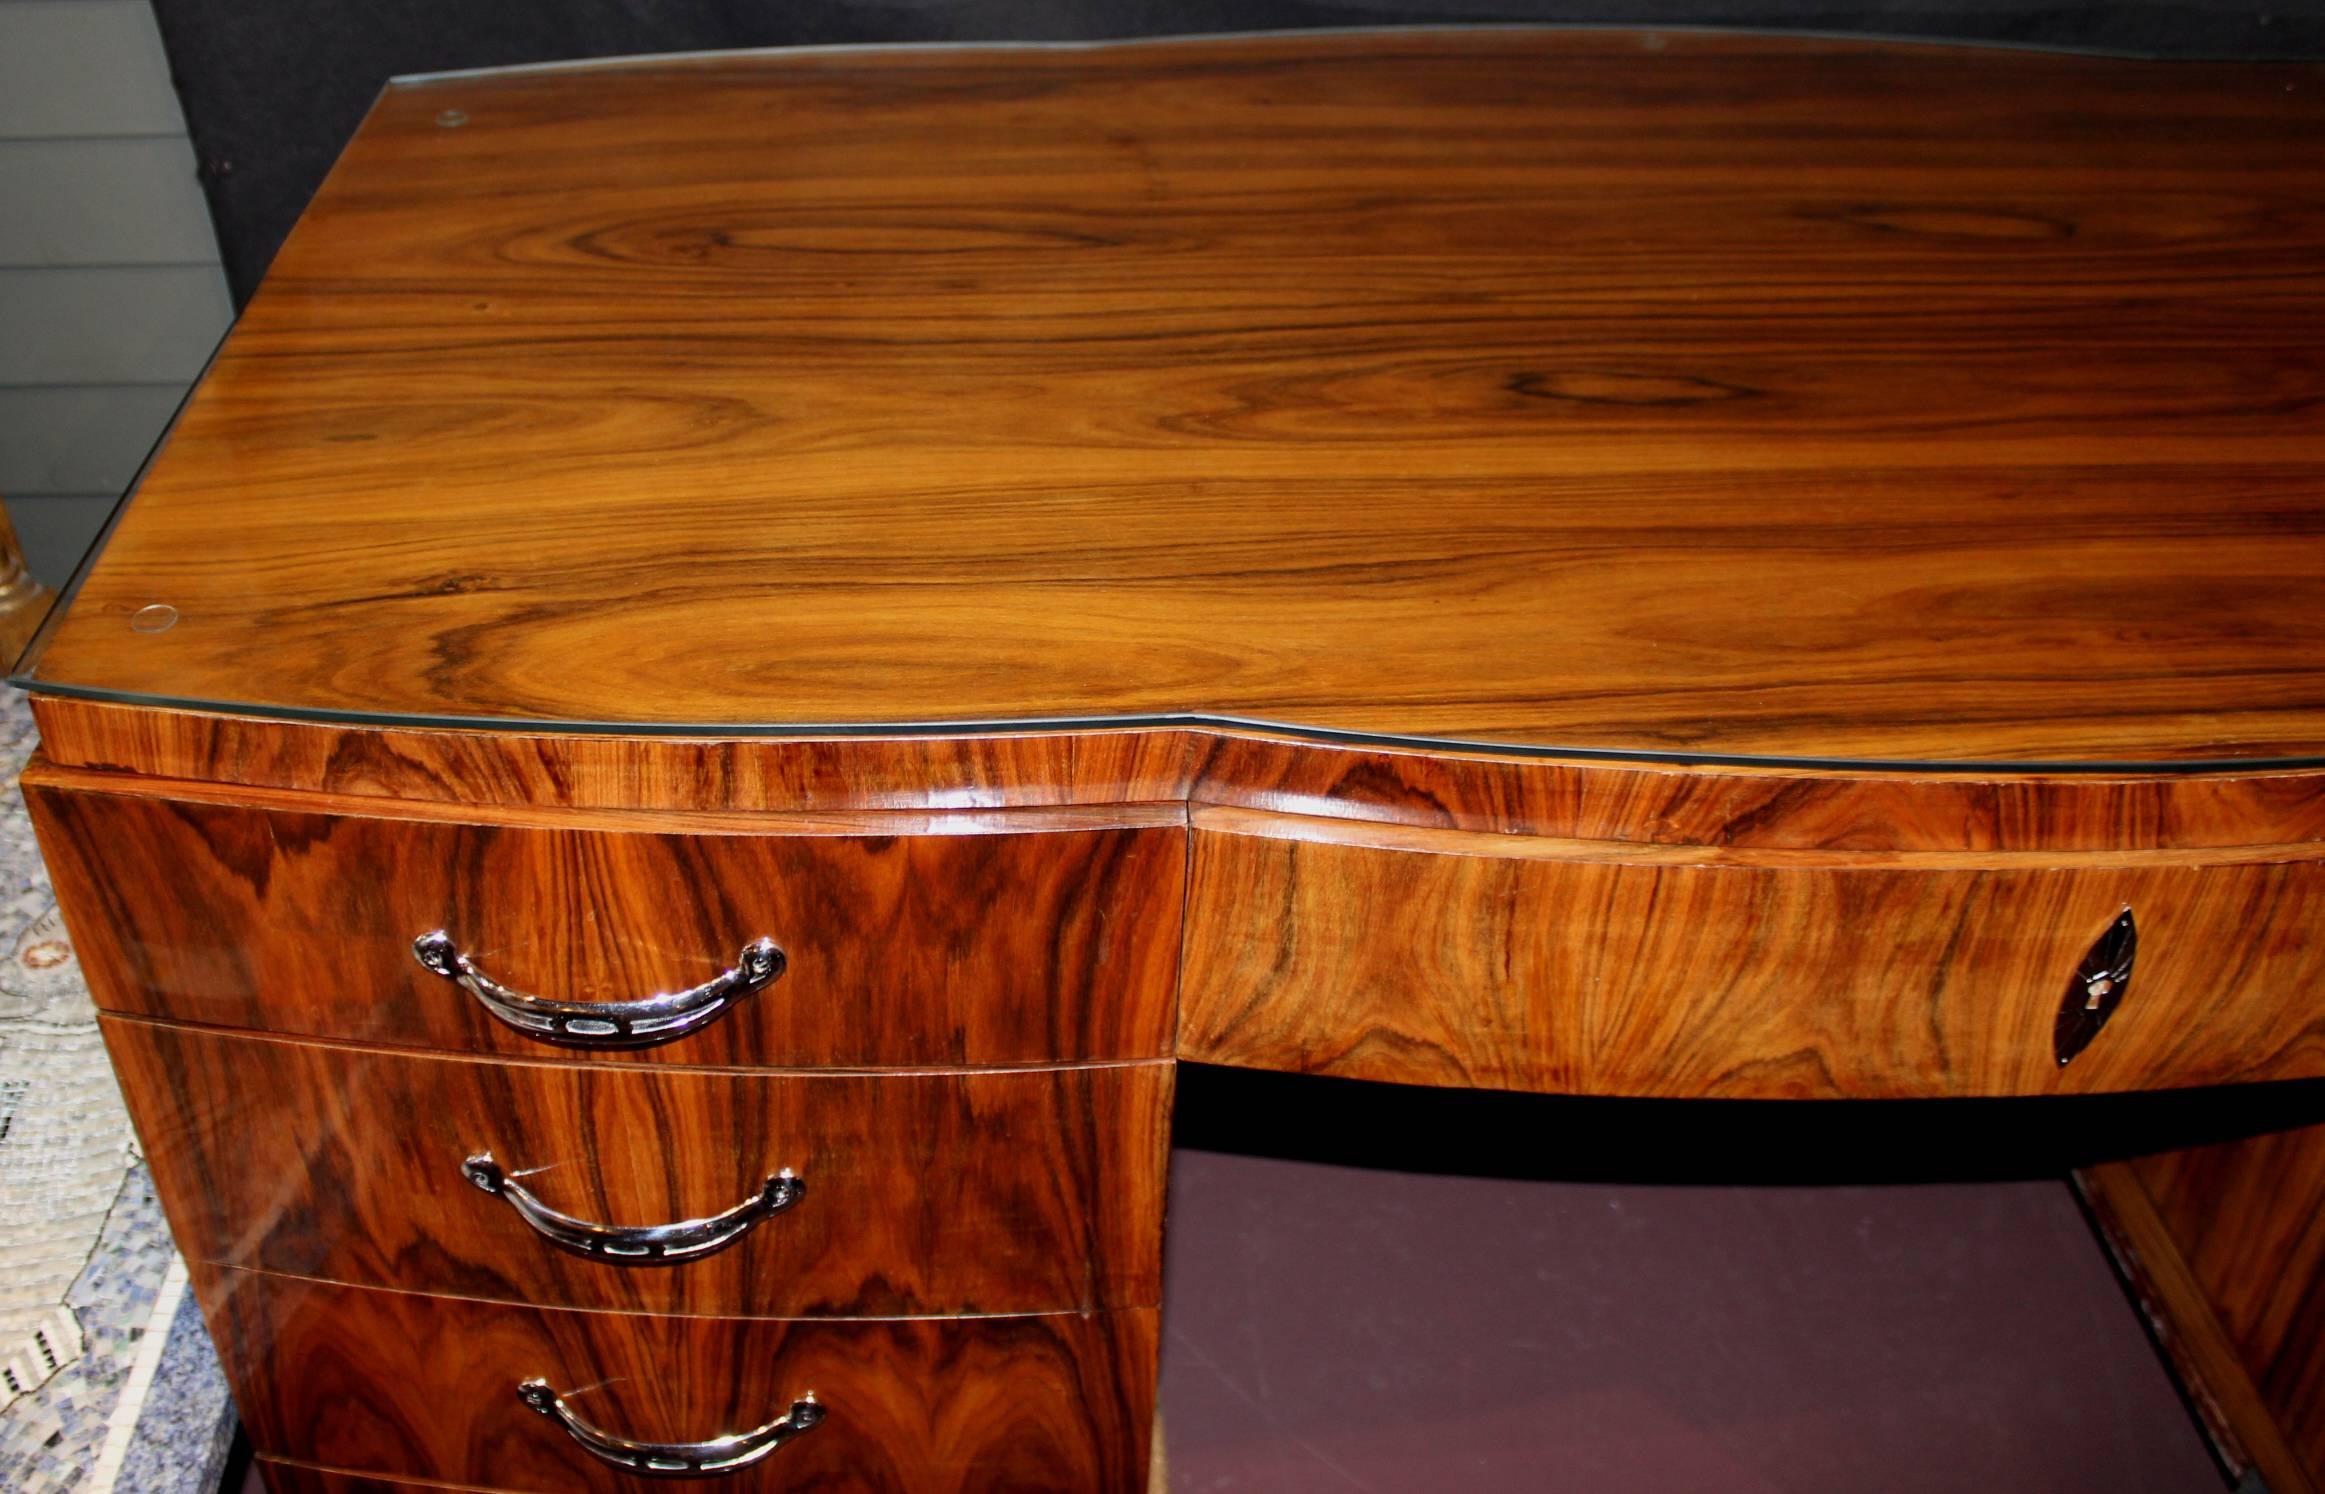 A fine form French Art Deco desk in a rich rosewood veneer, with custom fitted glass top over a single center drawer, four drawers on the left, and single door on the right which opens to a single shelf storage compartment or bookcase. The back of